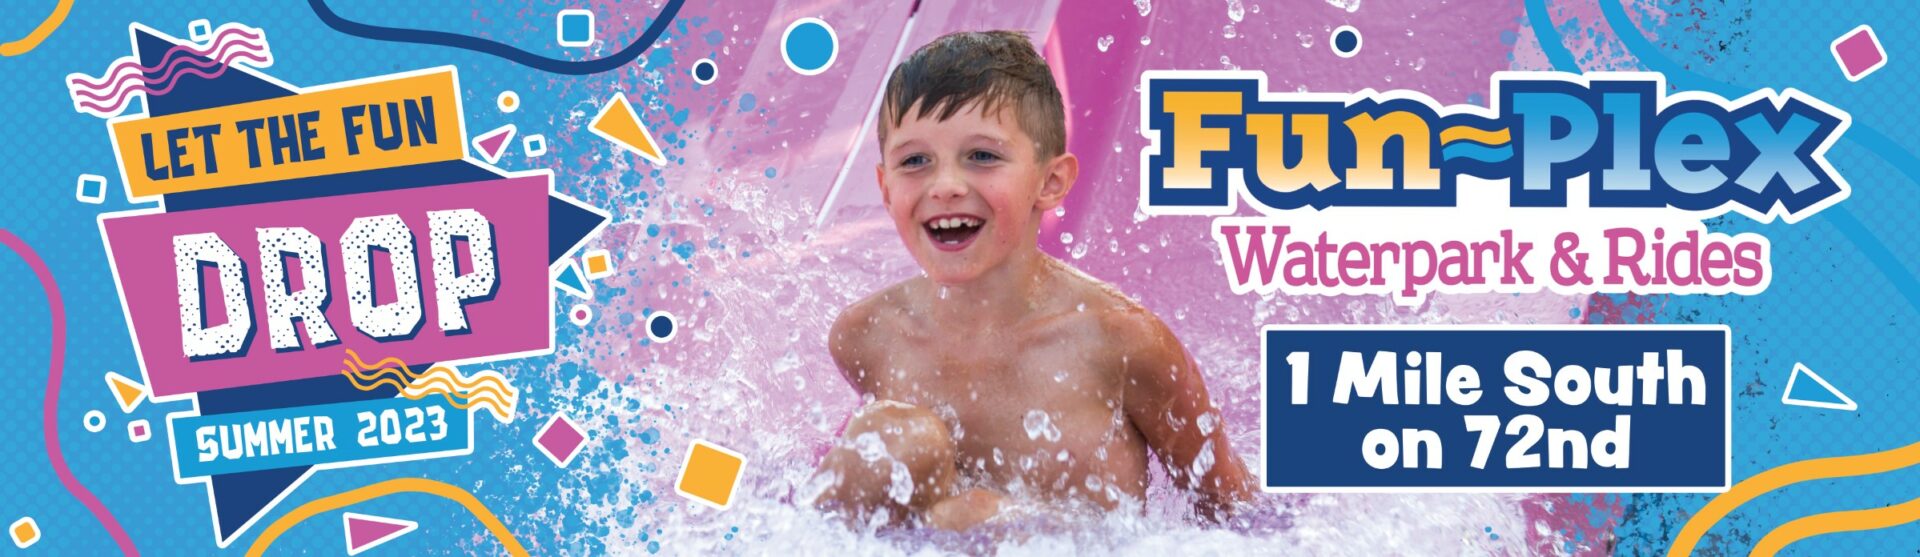 Excitement splashes at funplex: join the summer 2023 thrill with waterpark adventures and exhilarating rides just a mile south on 72nd!.